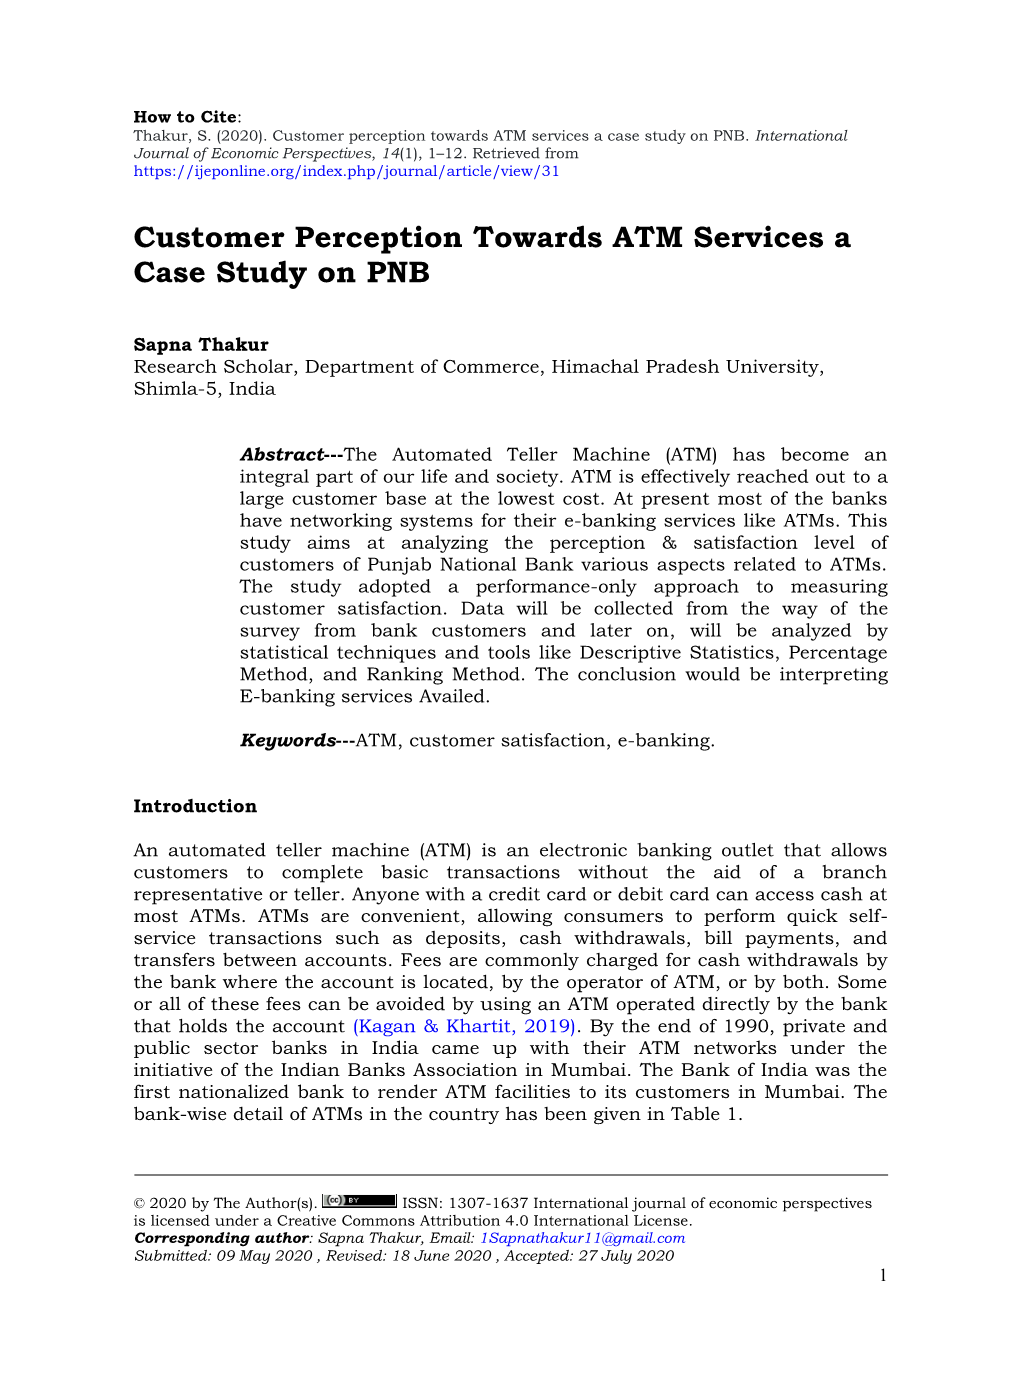 Customer Perception Towards ATM Services a Case Study on PNB